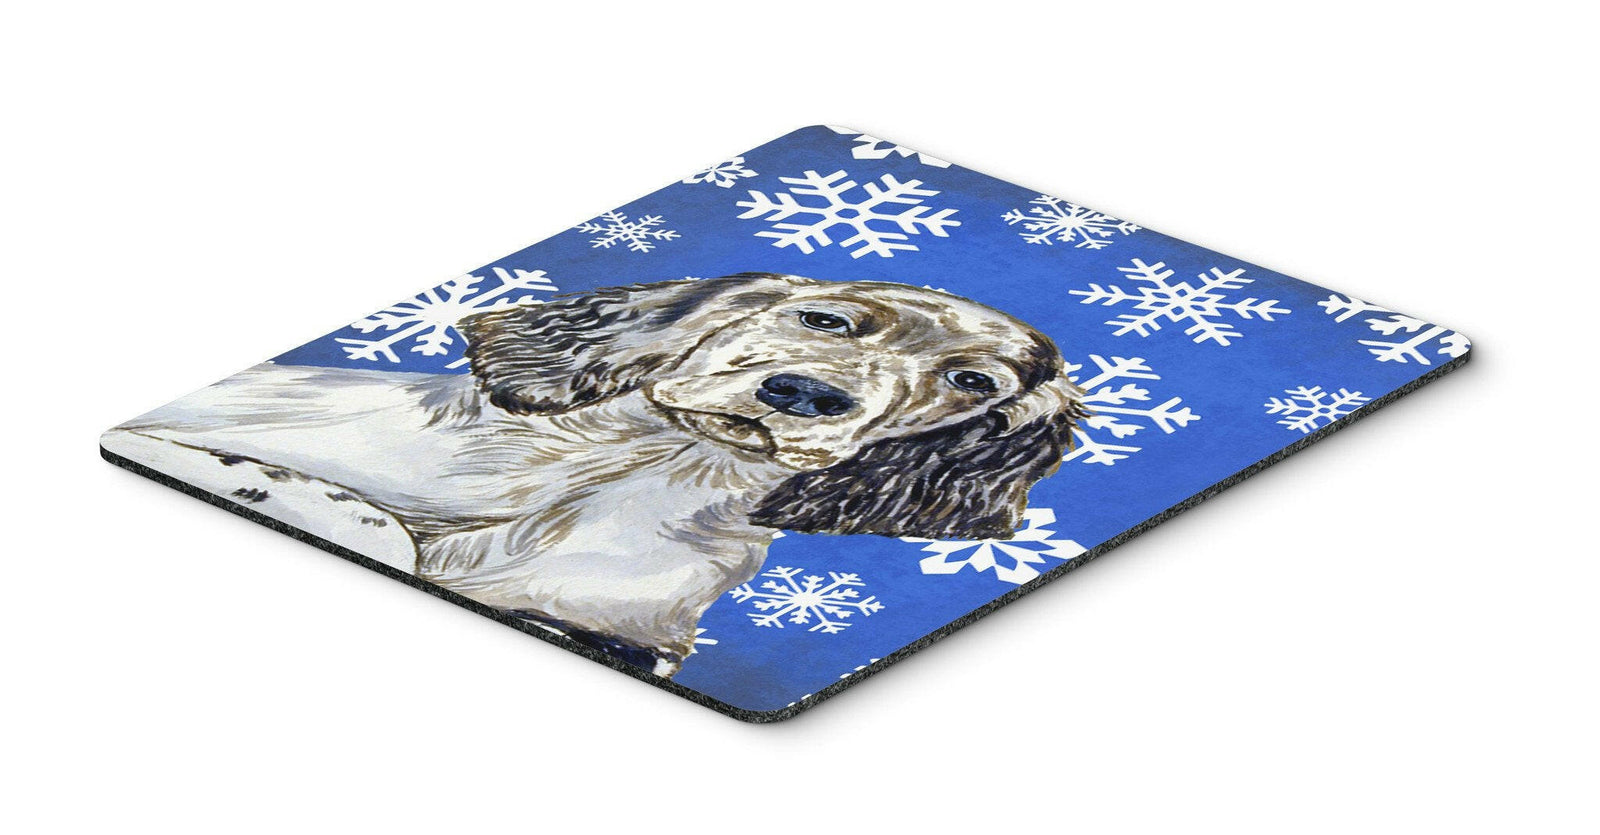 English Setter Winter Snowflakes Holiday Mouse Pad, Hot Pad or Trivet by Caroline's Treasures